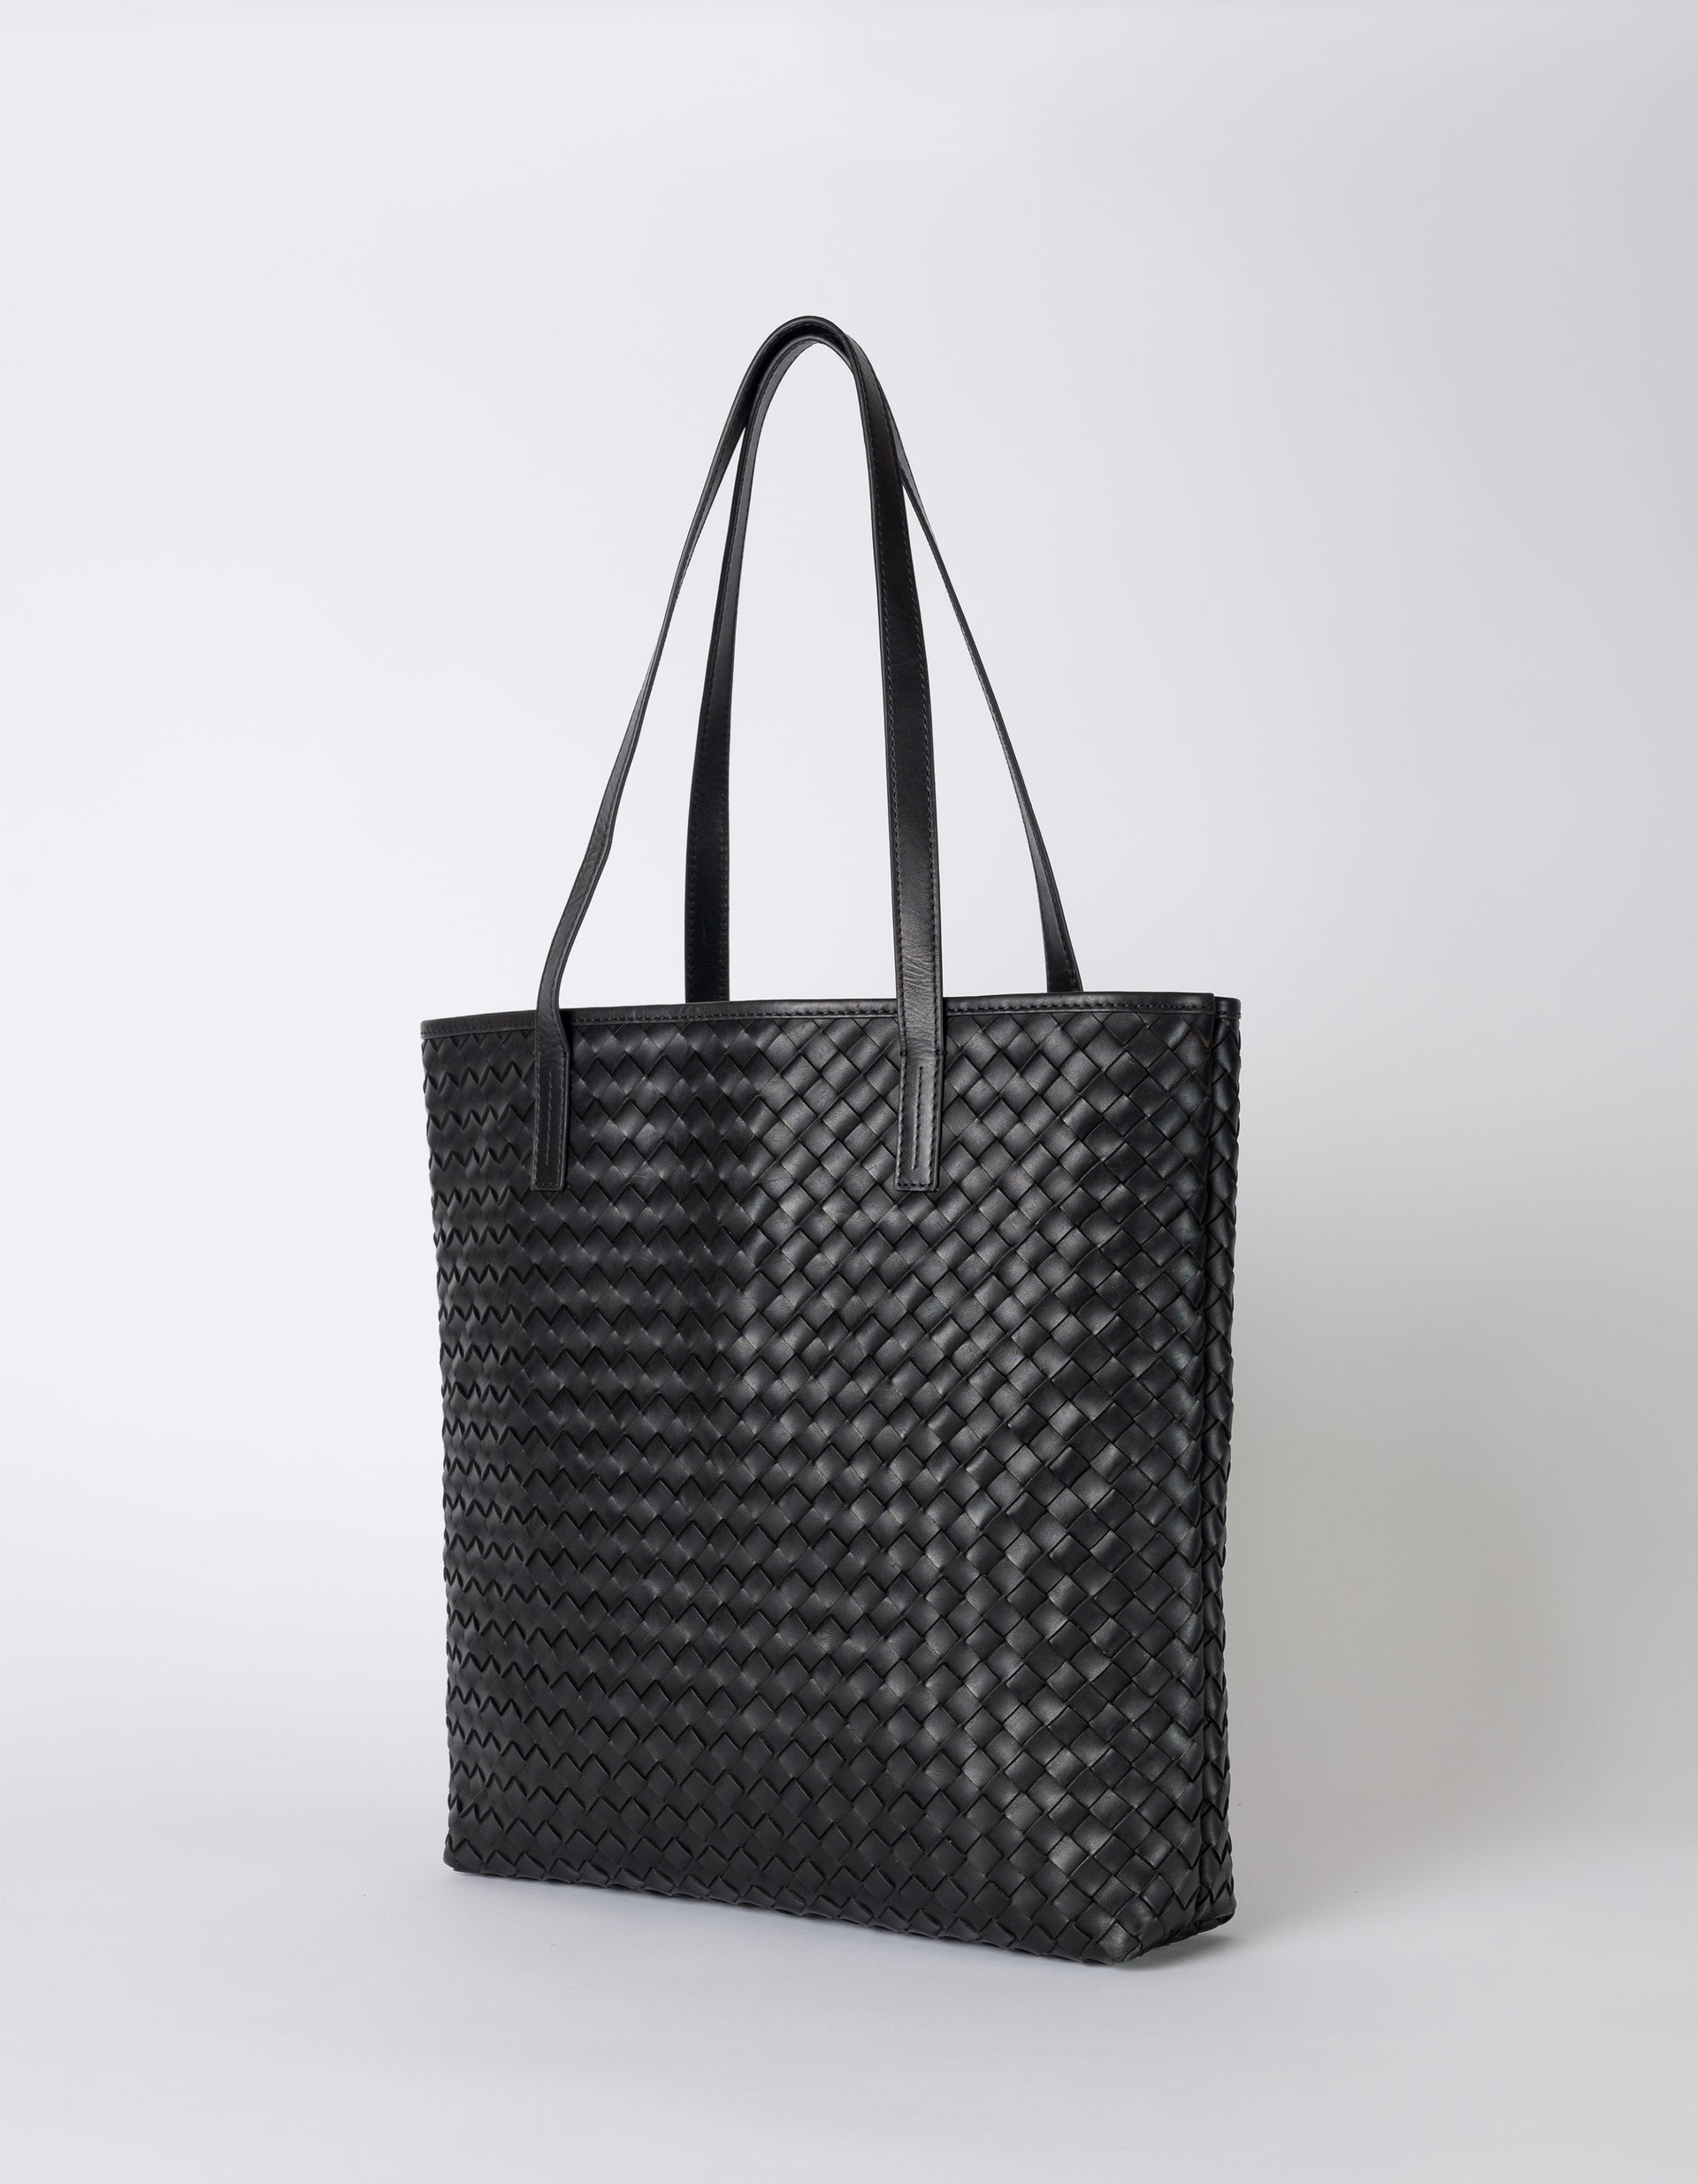 Georgia tote in black woven leather, side view